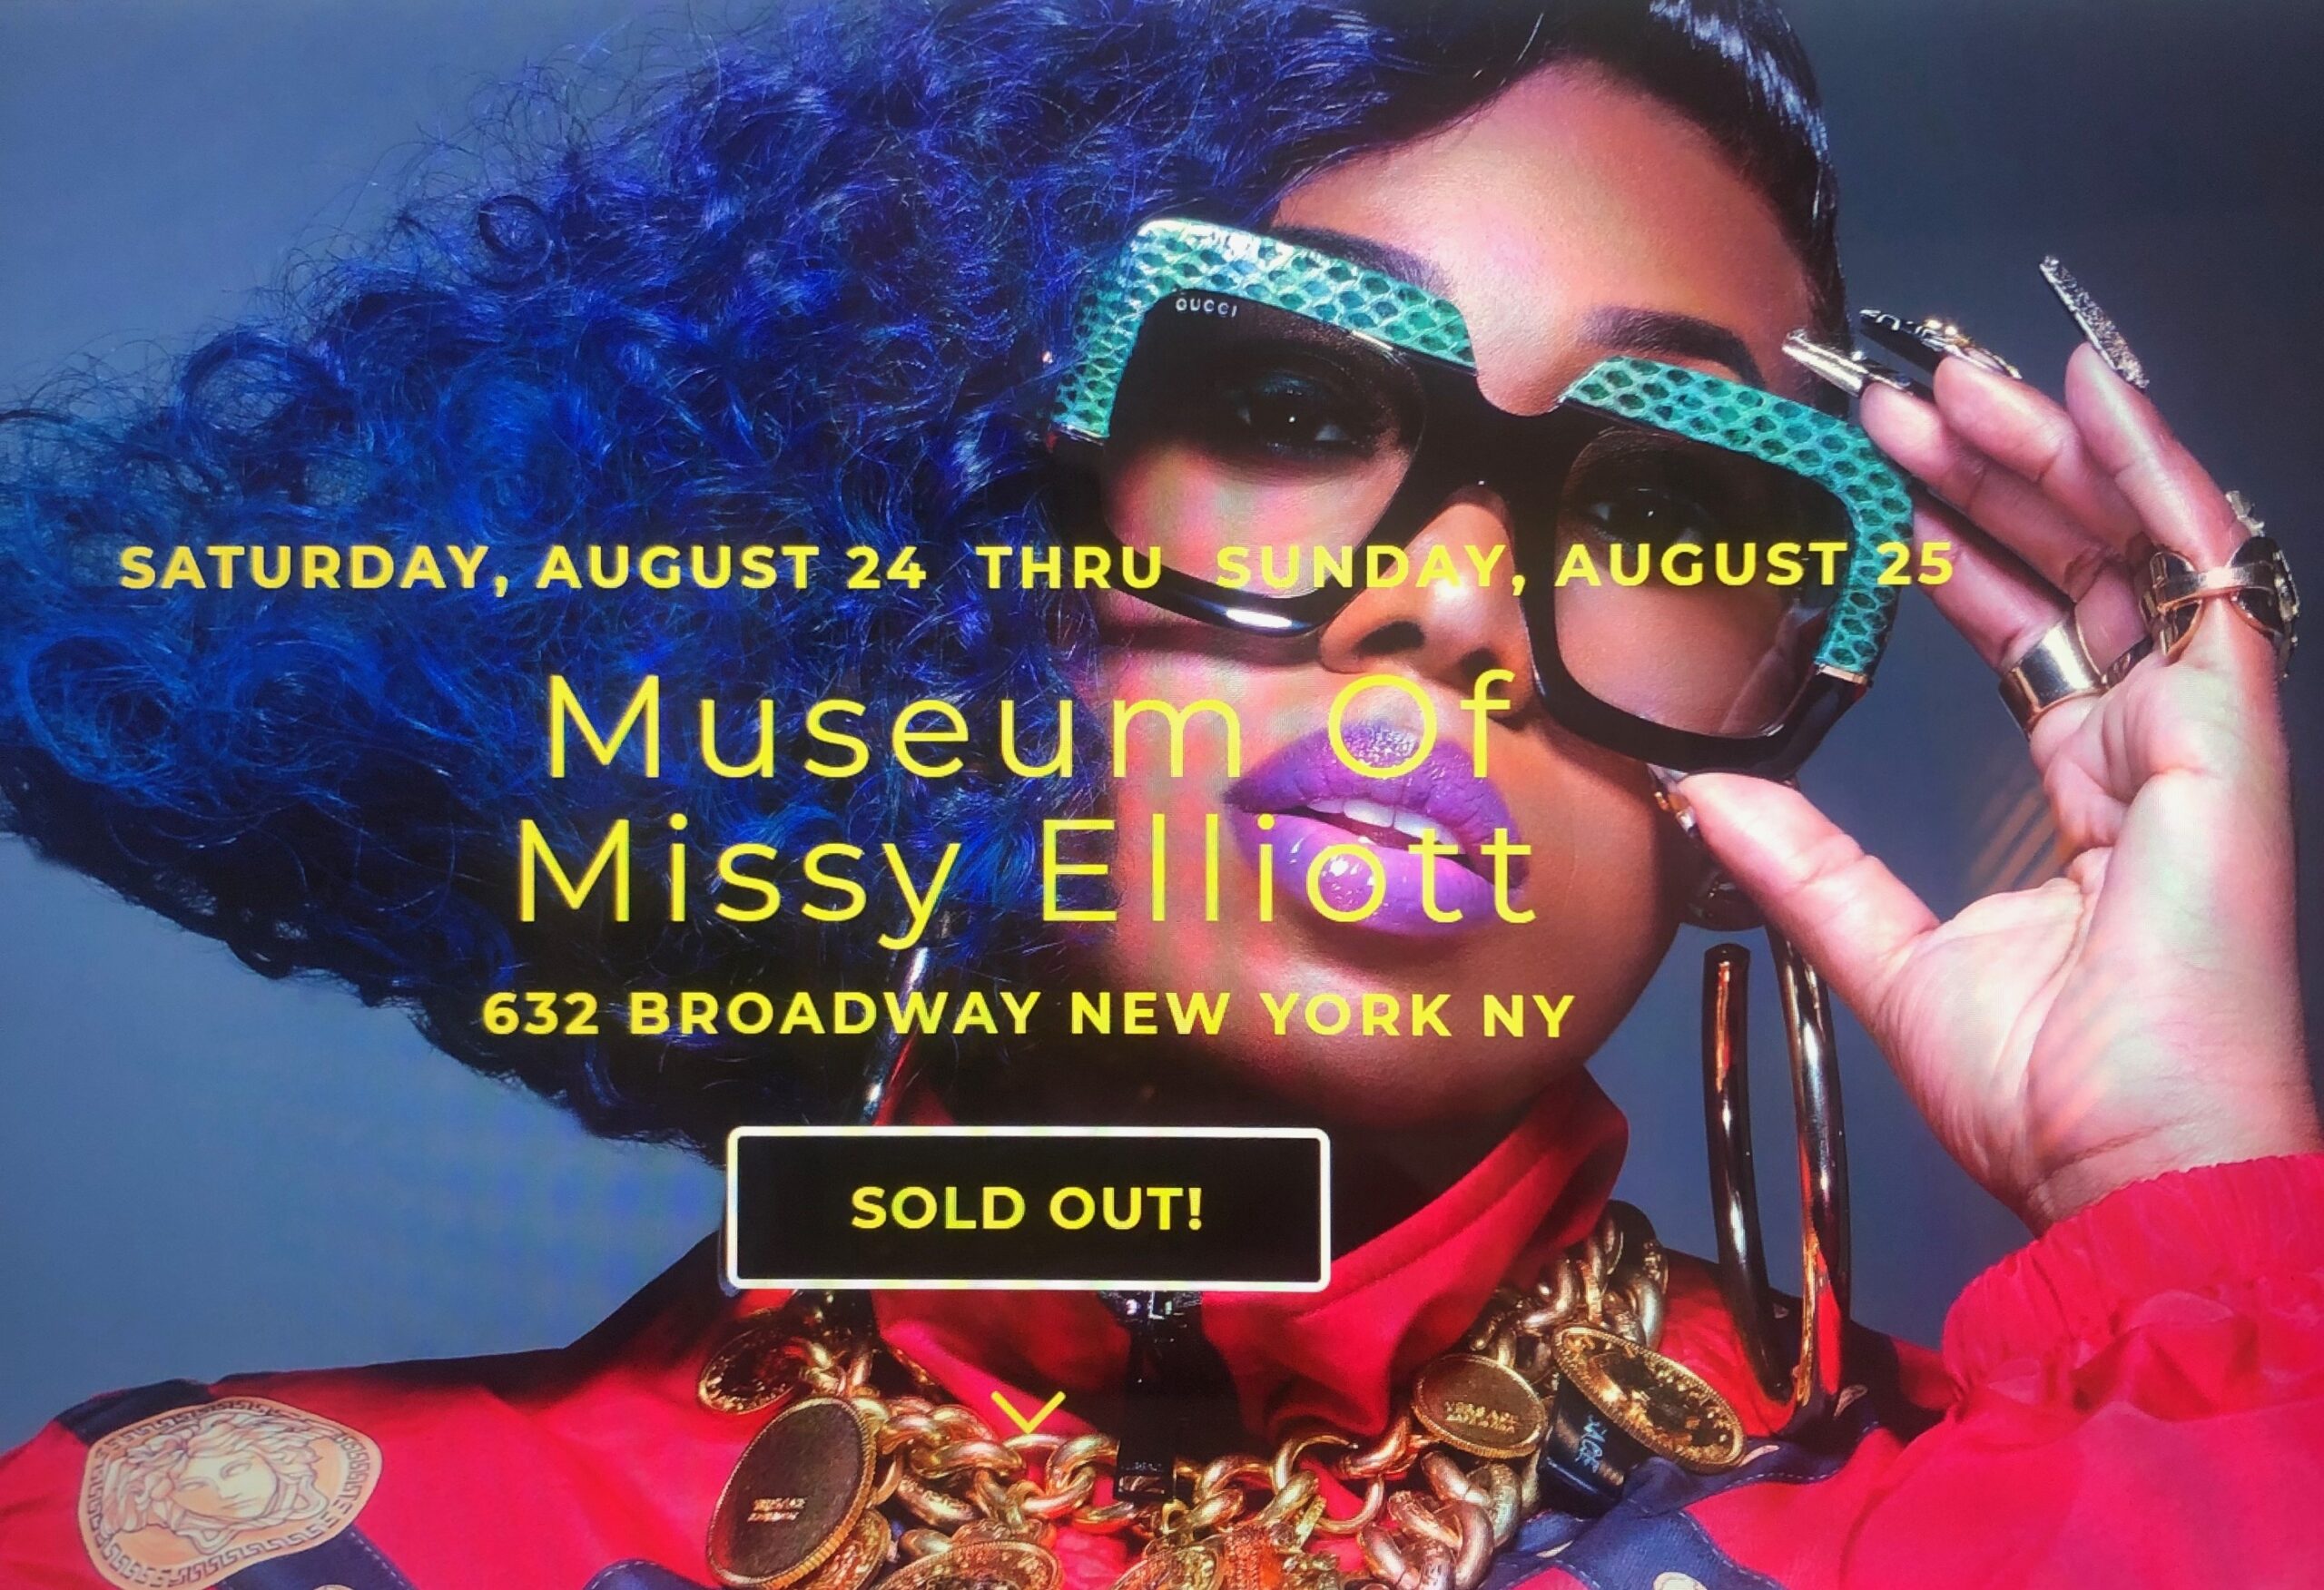 here comes the pop up museum of Missy Elliott